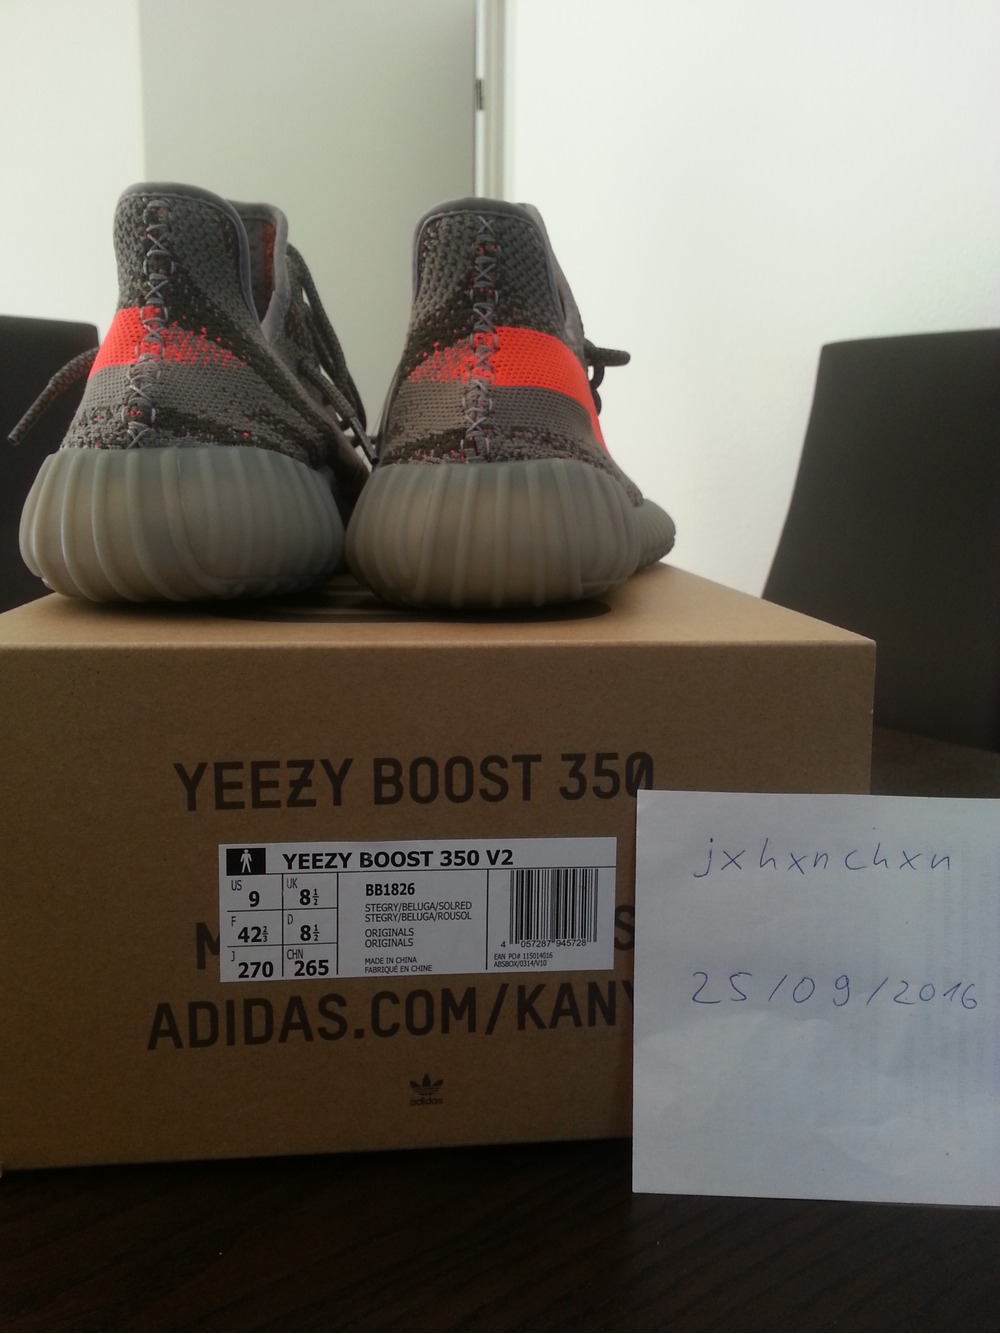 I bought fake yeezy 350 V2 black / red (afterwards unboxing review